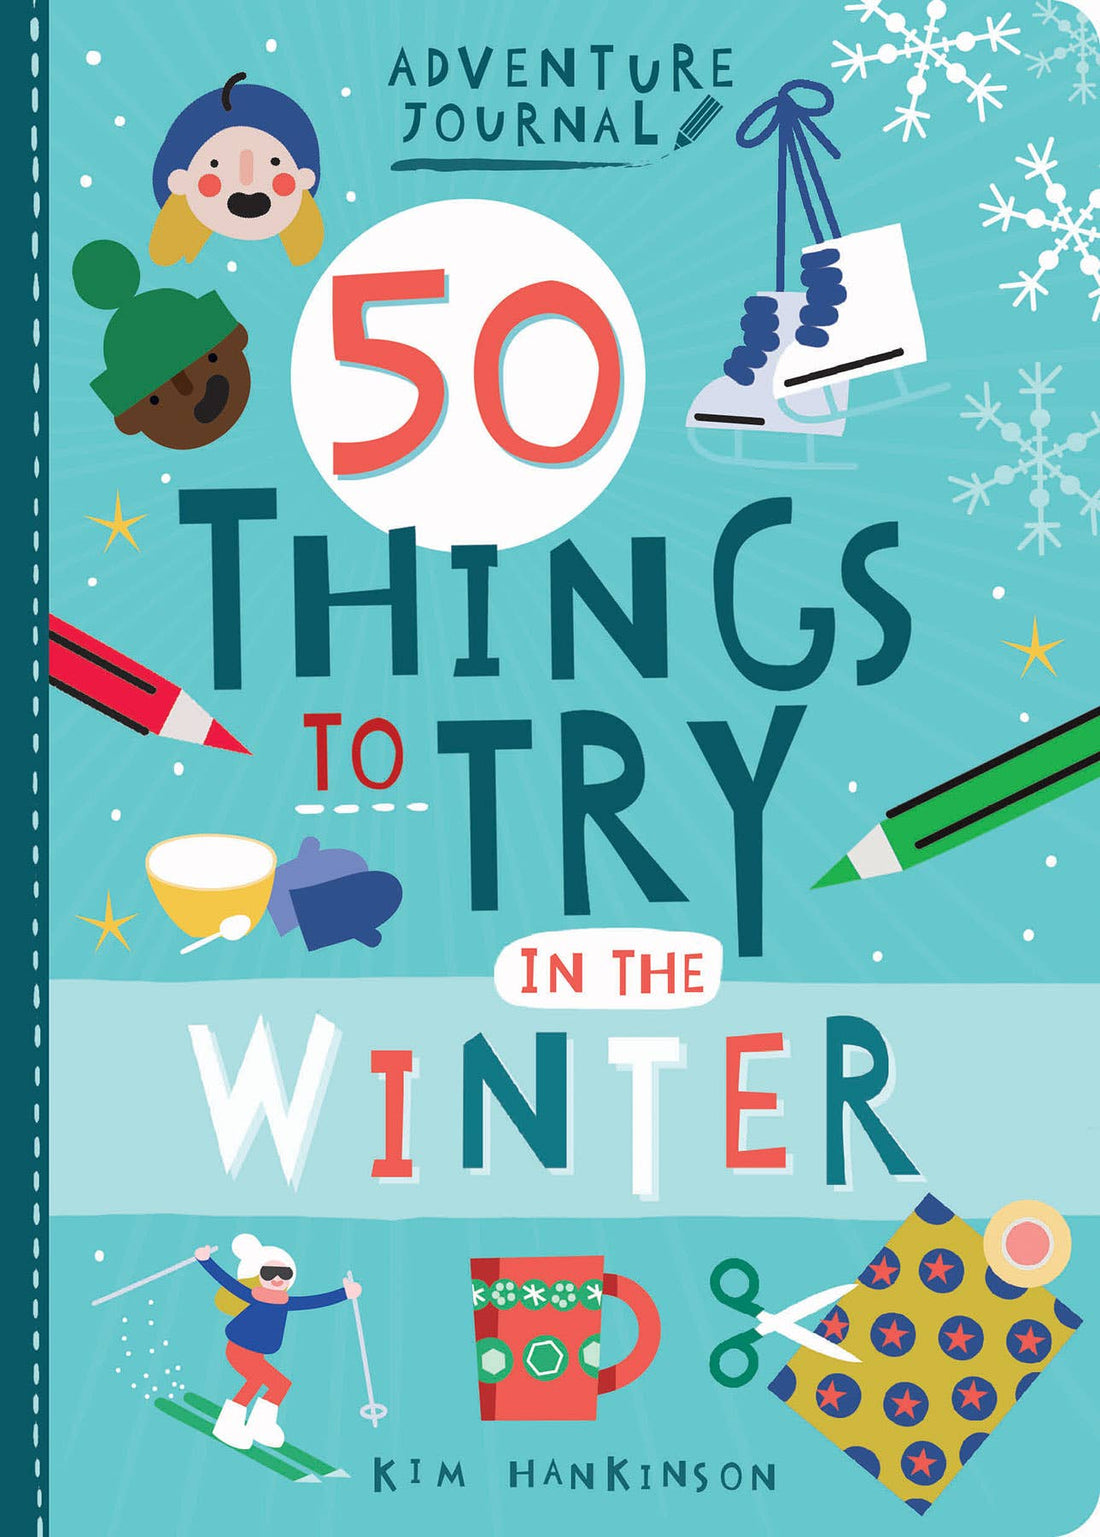 Adventure Journal: 50 Things to Try in the Winter